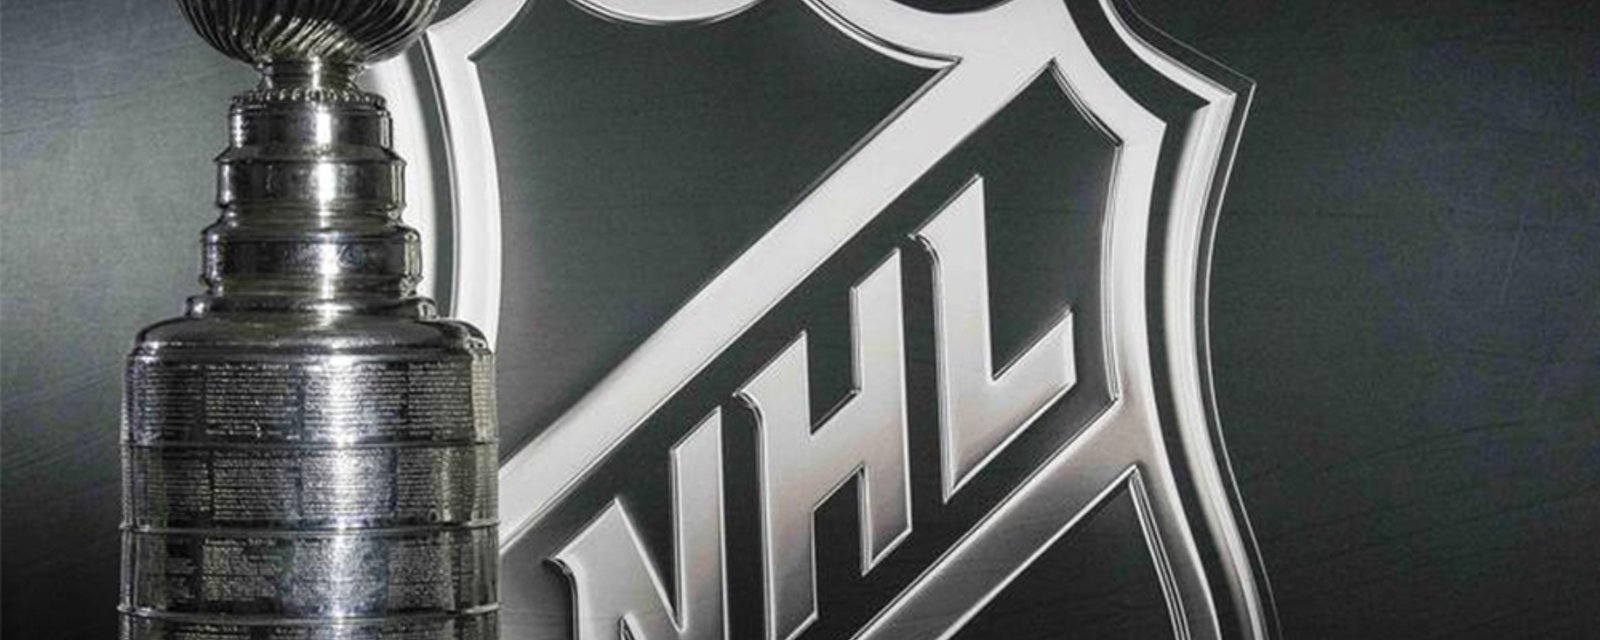 3 controversial rules included in the NHL's return to play initiative.